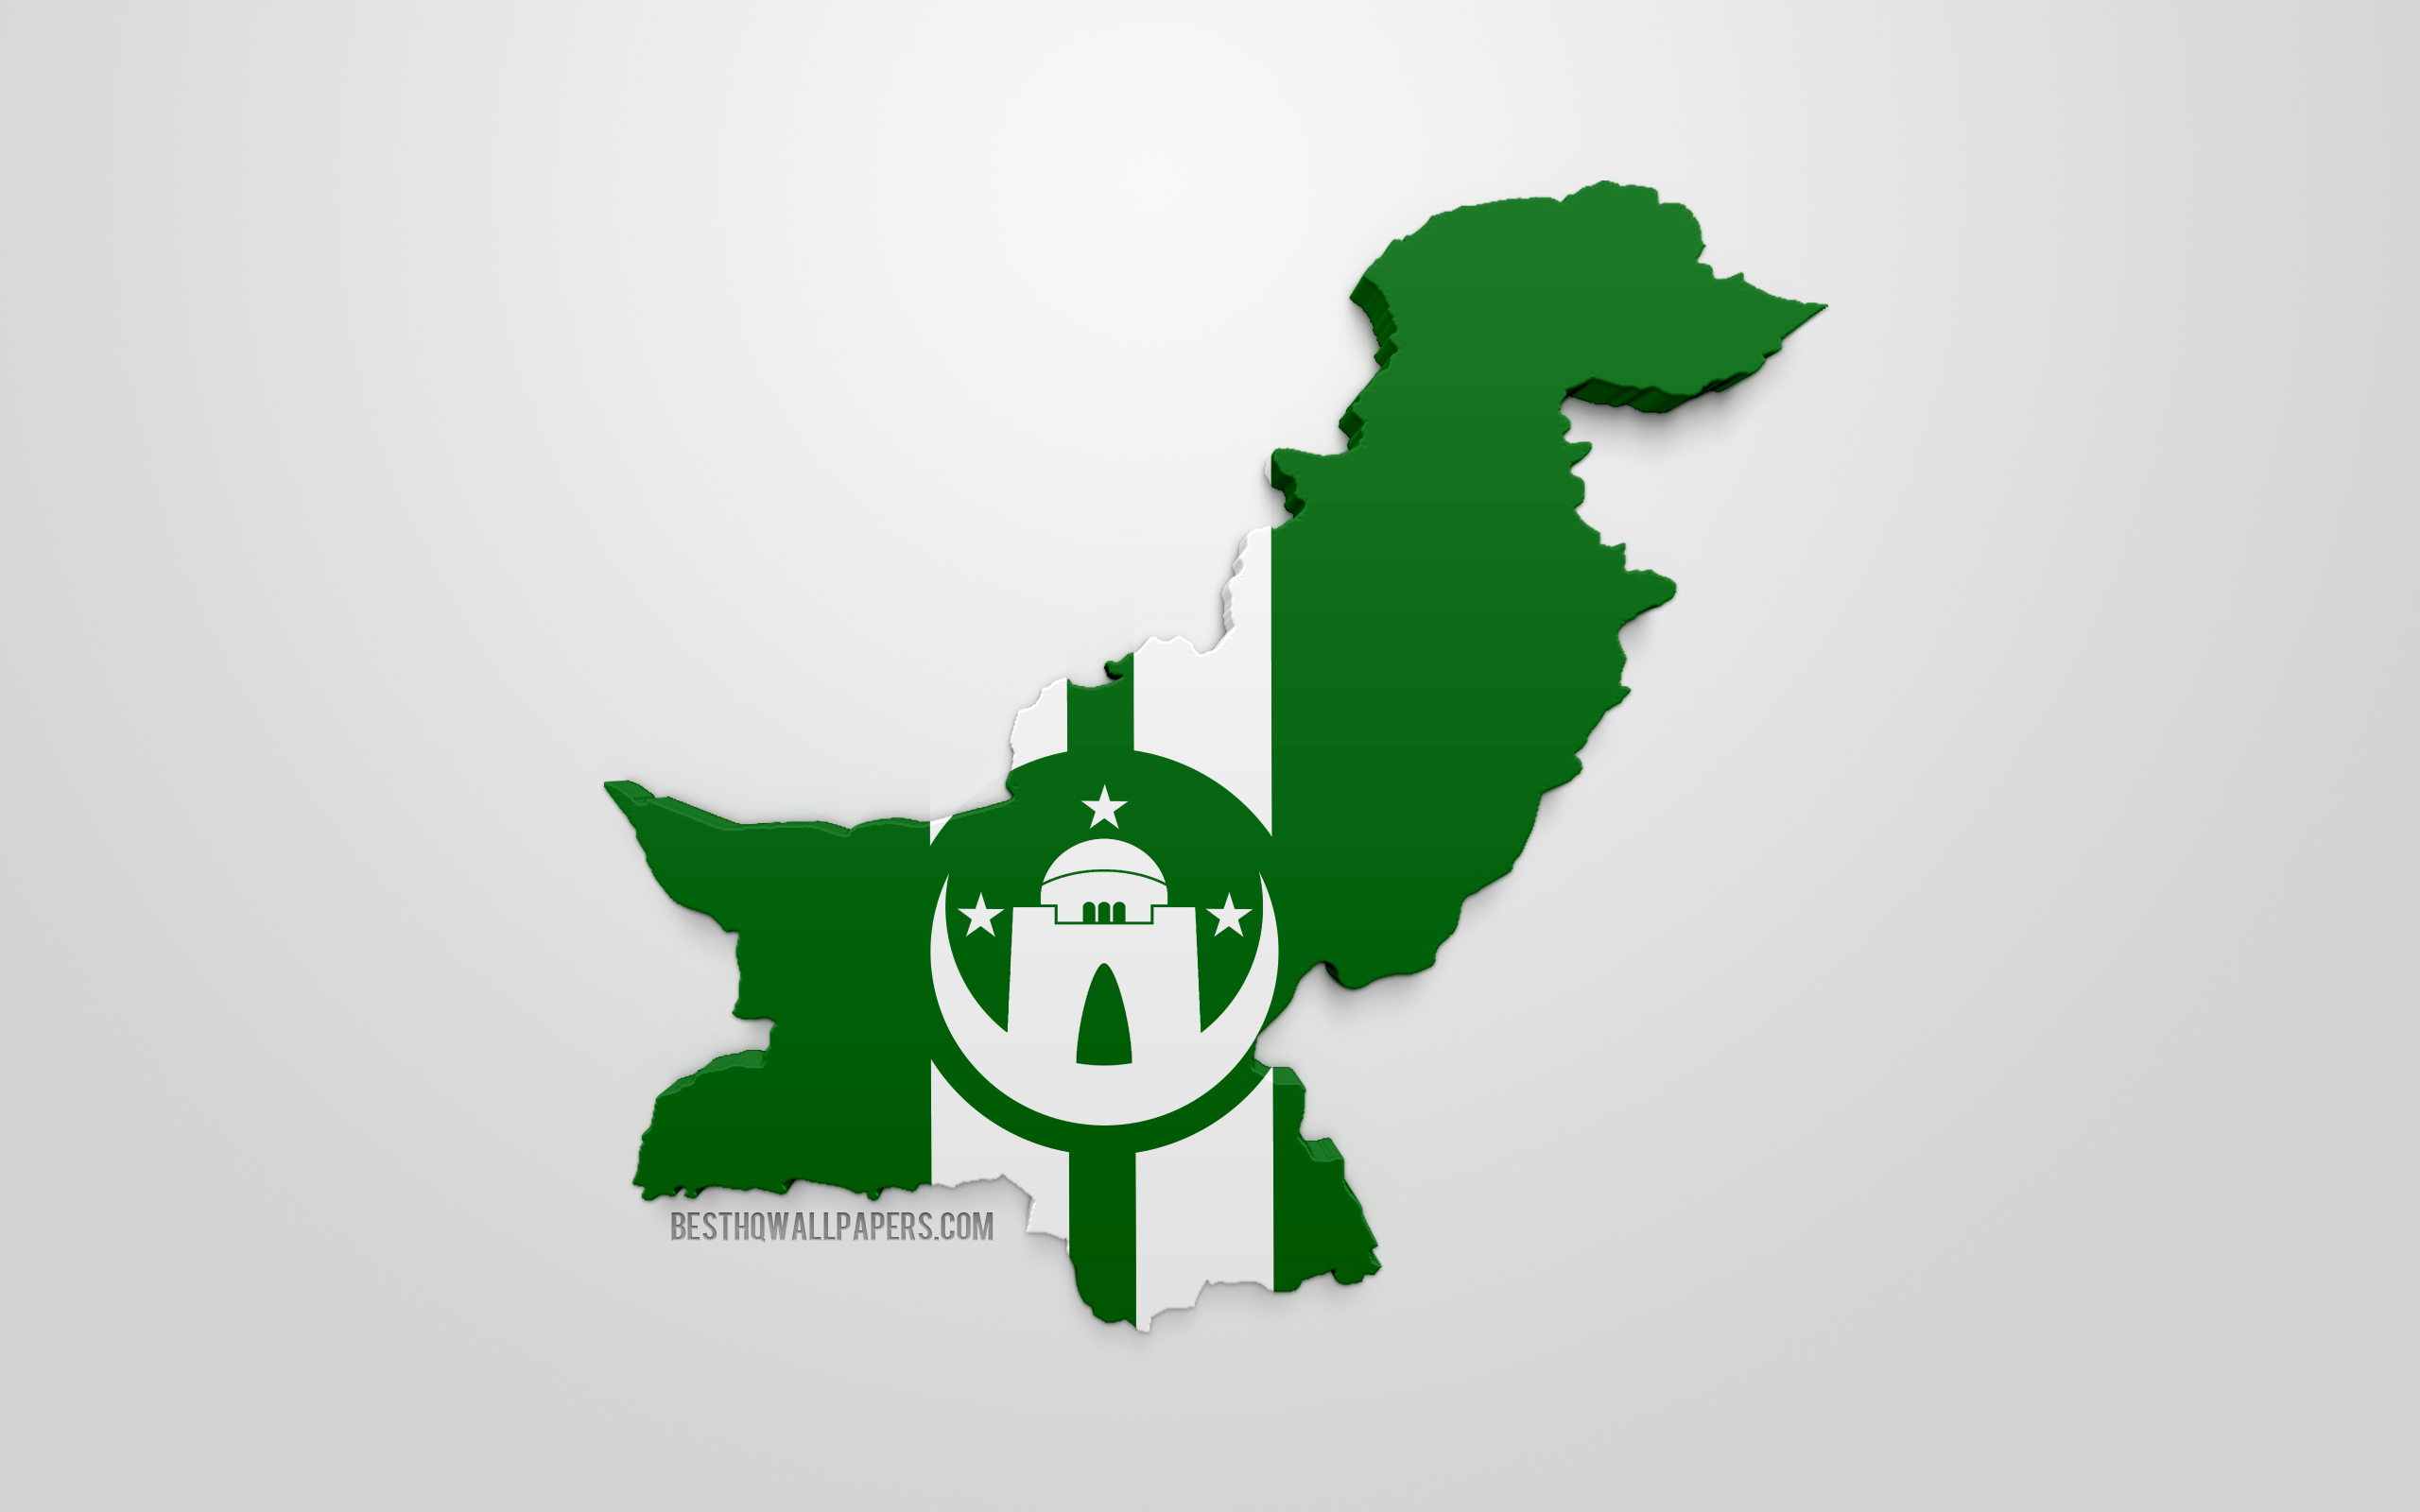 Download wallpaper Karachi map silhouette, 3D flag of Karachi, 3D art, Karachi 3D flag, Karachi, Pakistan, Flag of Karachi, geography, Karachi 3D map silhouette for desktop with resolution 2560x1600. High Quality HD